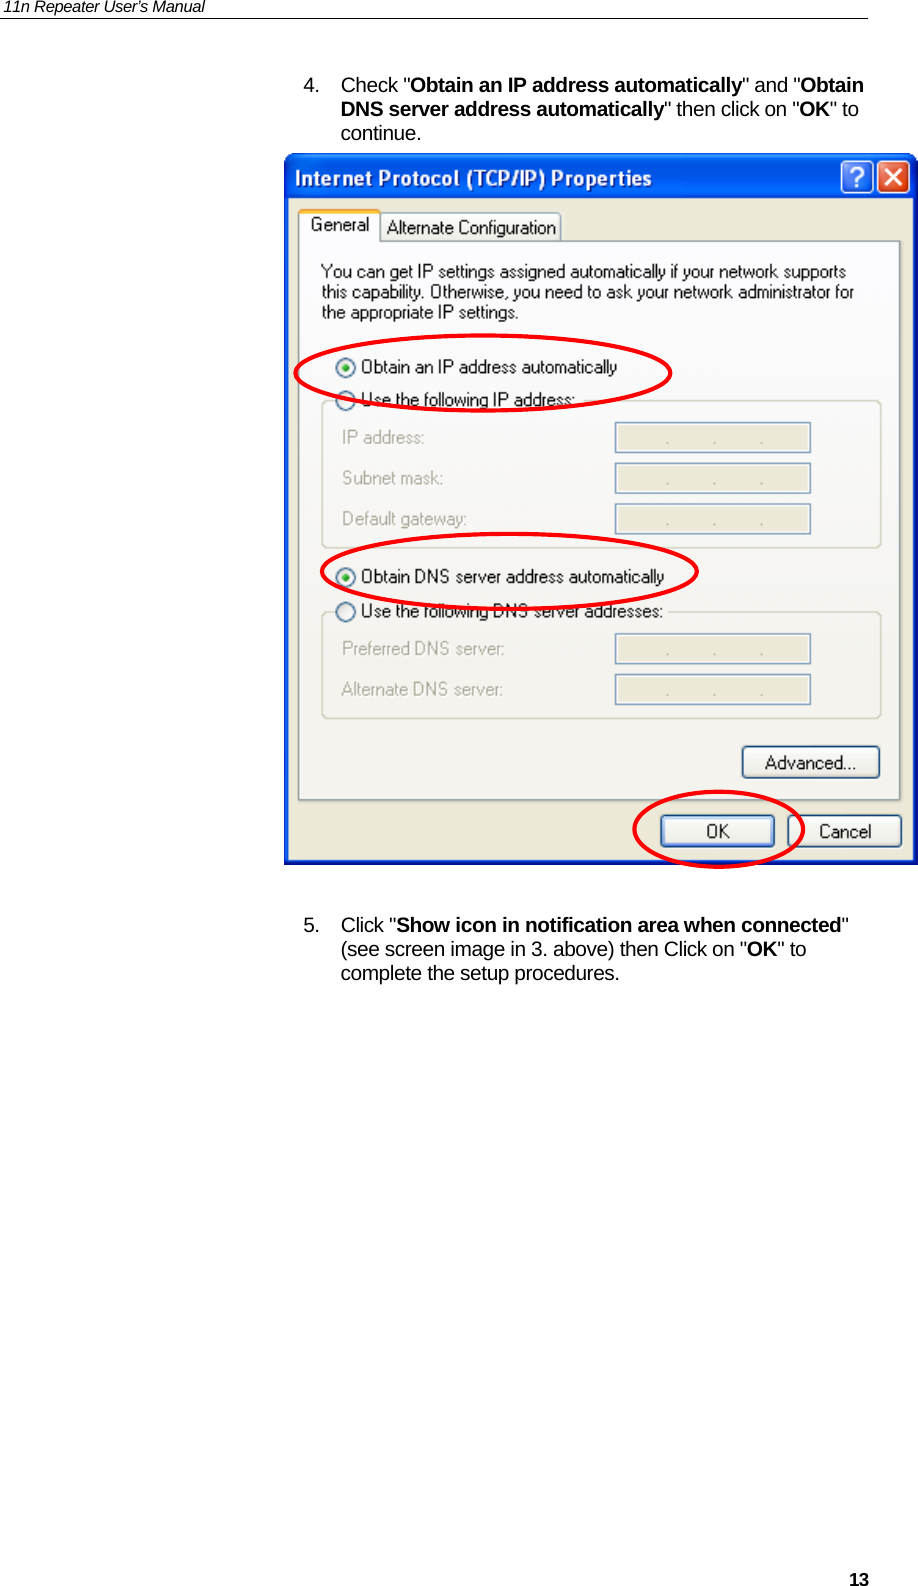 11n Repeater User’s Manual     134. Check &quot;Obtain an IP address automatically&quot; and &quot;Obtain DNS server address automatically&quot; then click on &quot;OK&quot; to continue.   5. Click &quot;Show icon in notification area when connected&quot; (see screen image in 3. above) then Click on &quot;OK&quot; to complete the setup procedures.                